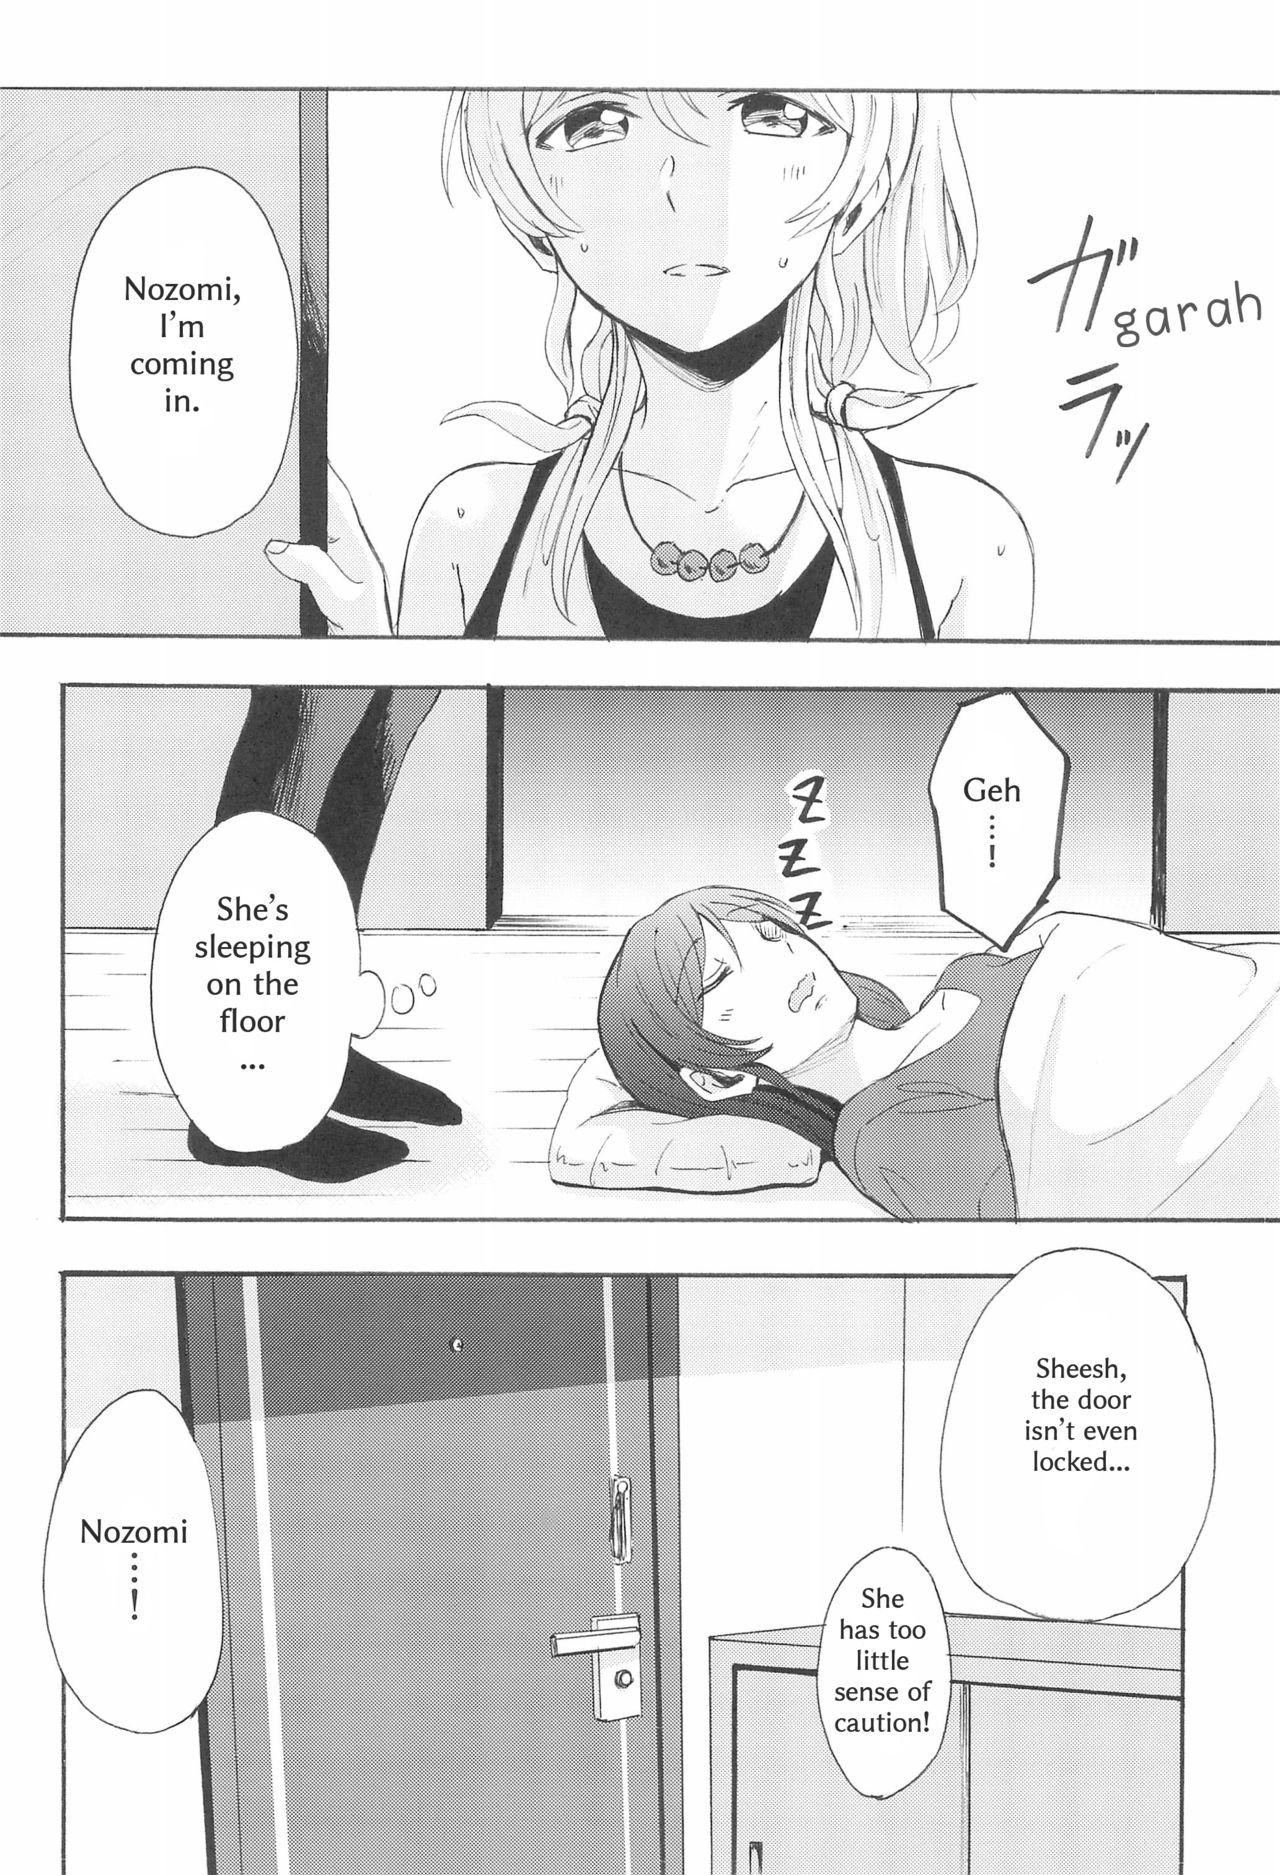 Highschool LONELINESS - Love live Pussy Sex - Page 7